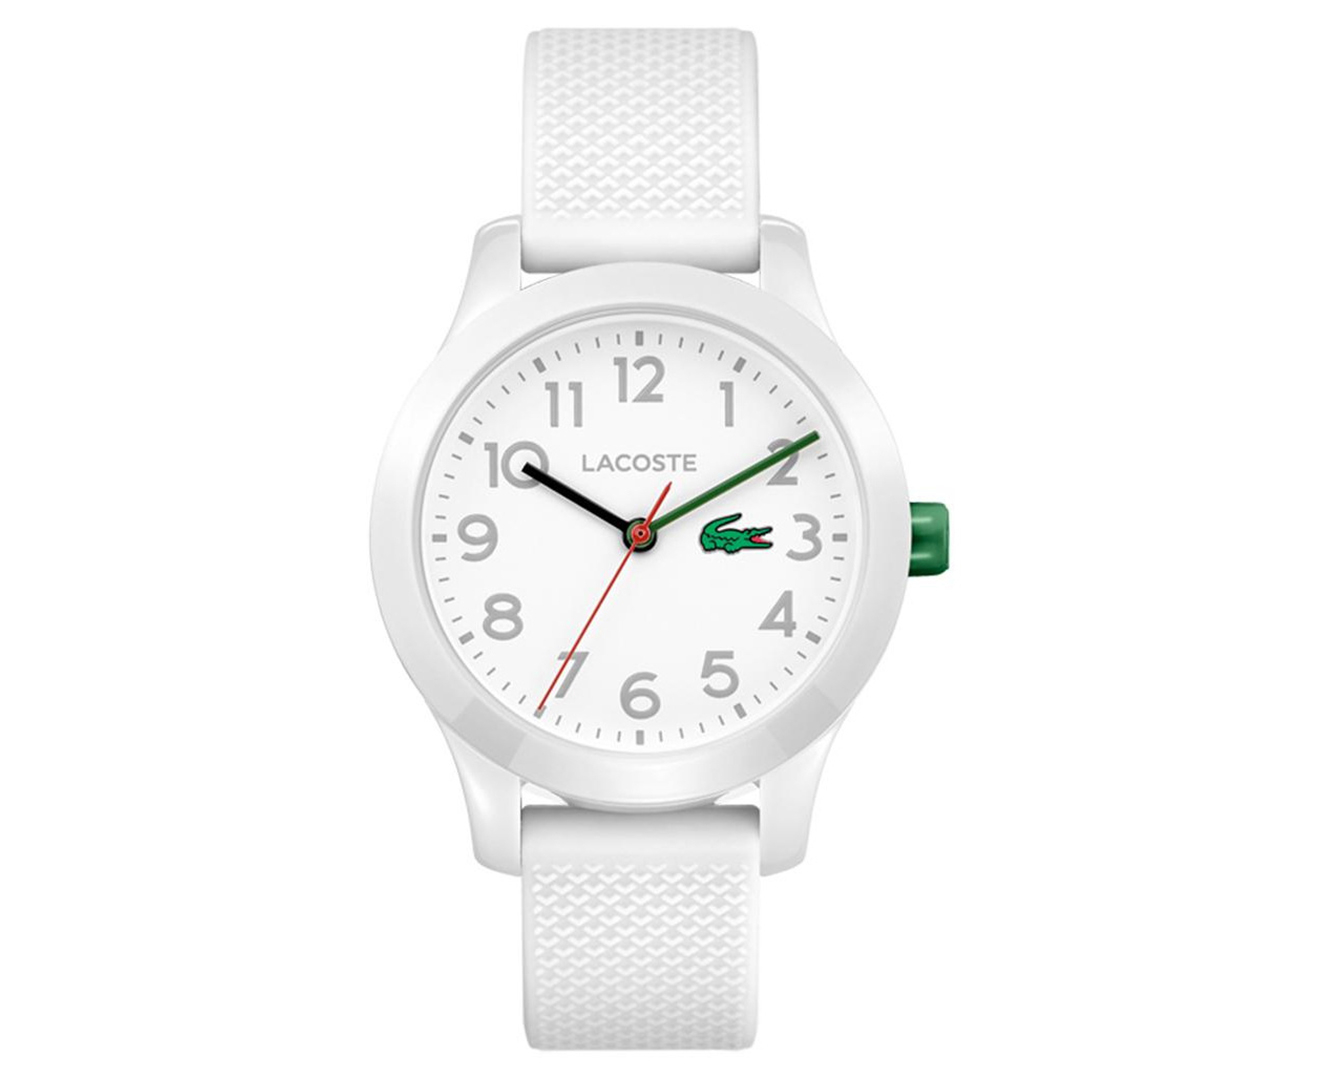 arve Hård ring tryk Check Out the Lacoste Outlet Online | Catch.com.au